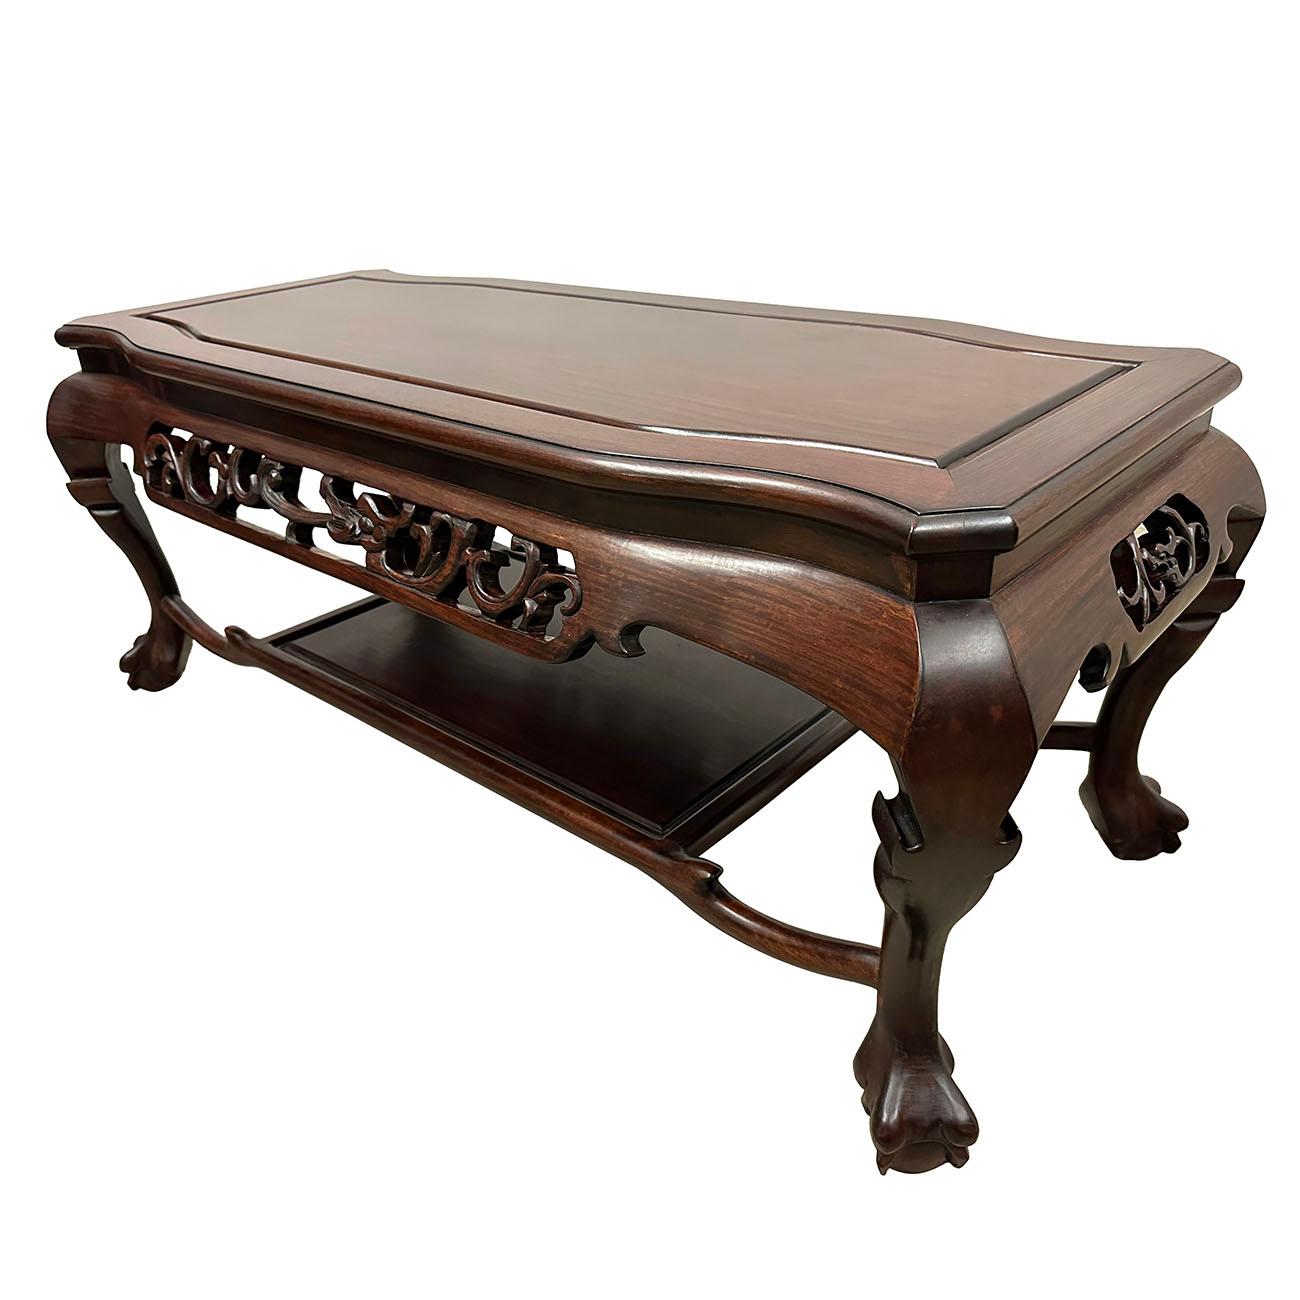 

This Chinese classic solid rosewood coffee table is laced with hand-carved dragon motif along the four sides of the apron. The curved legs ending on the tiger-paw feet give a graceful and also sturdy look. A shelf underneath gives you a extra